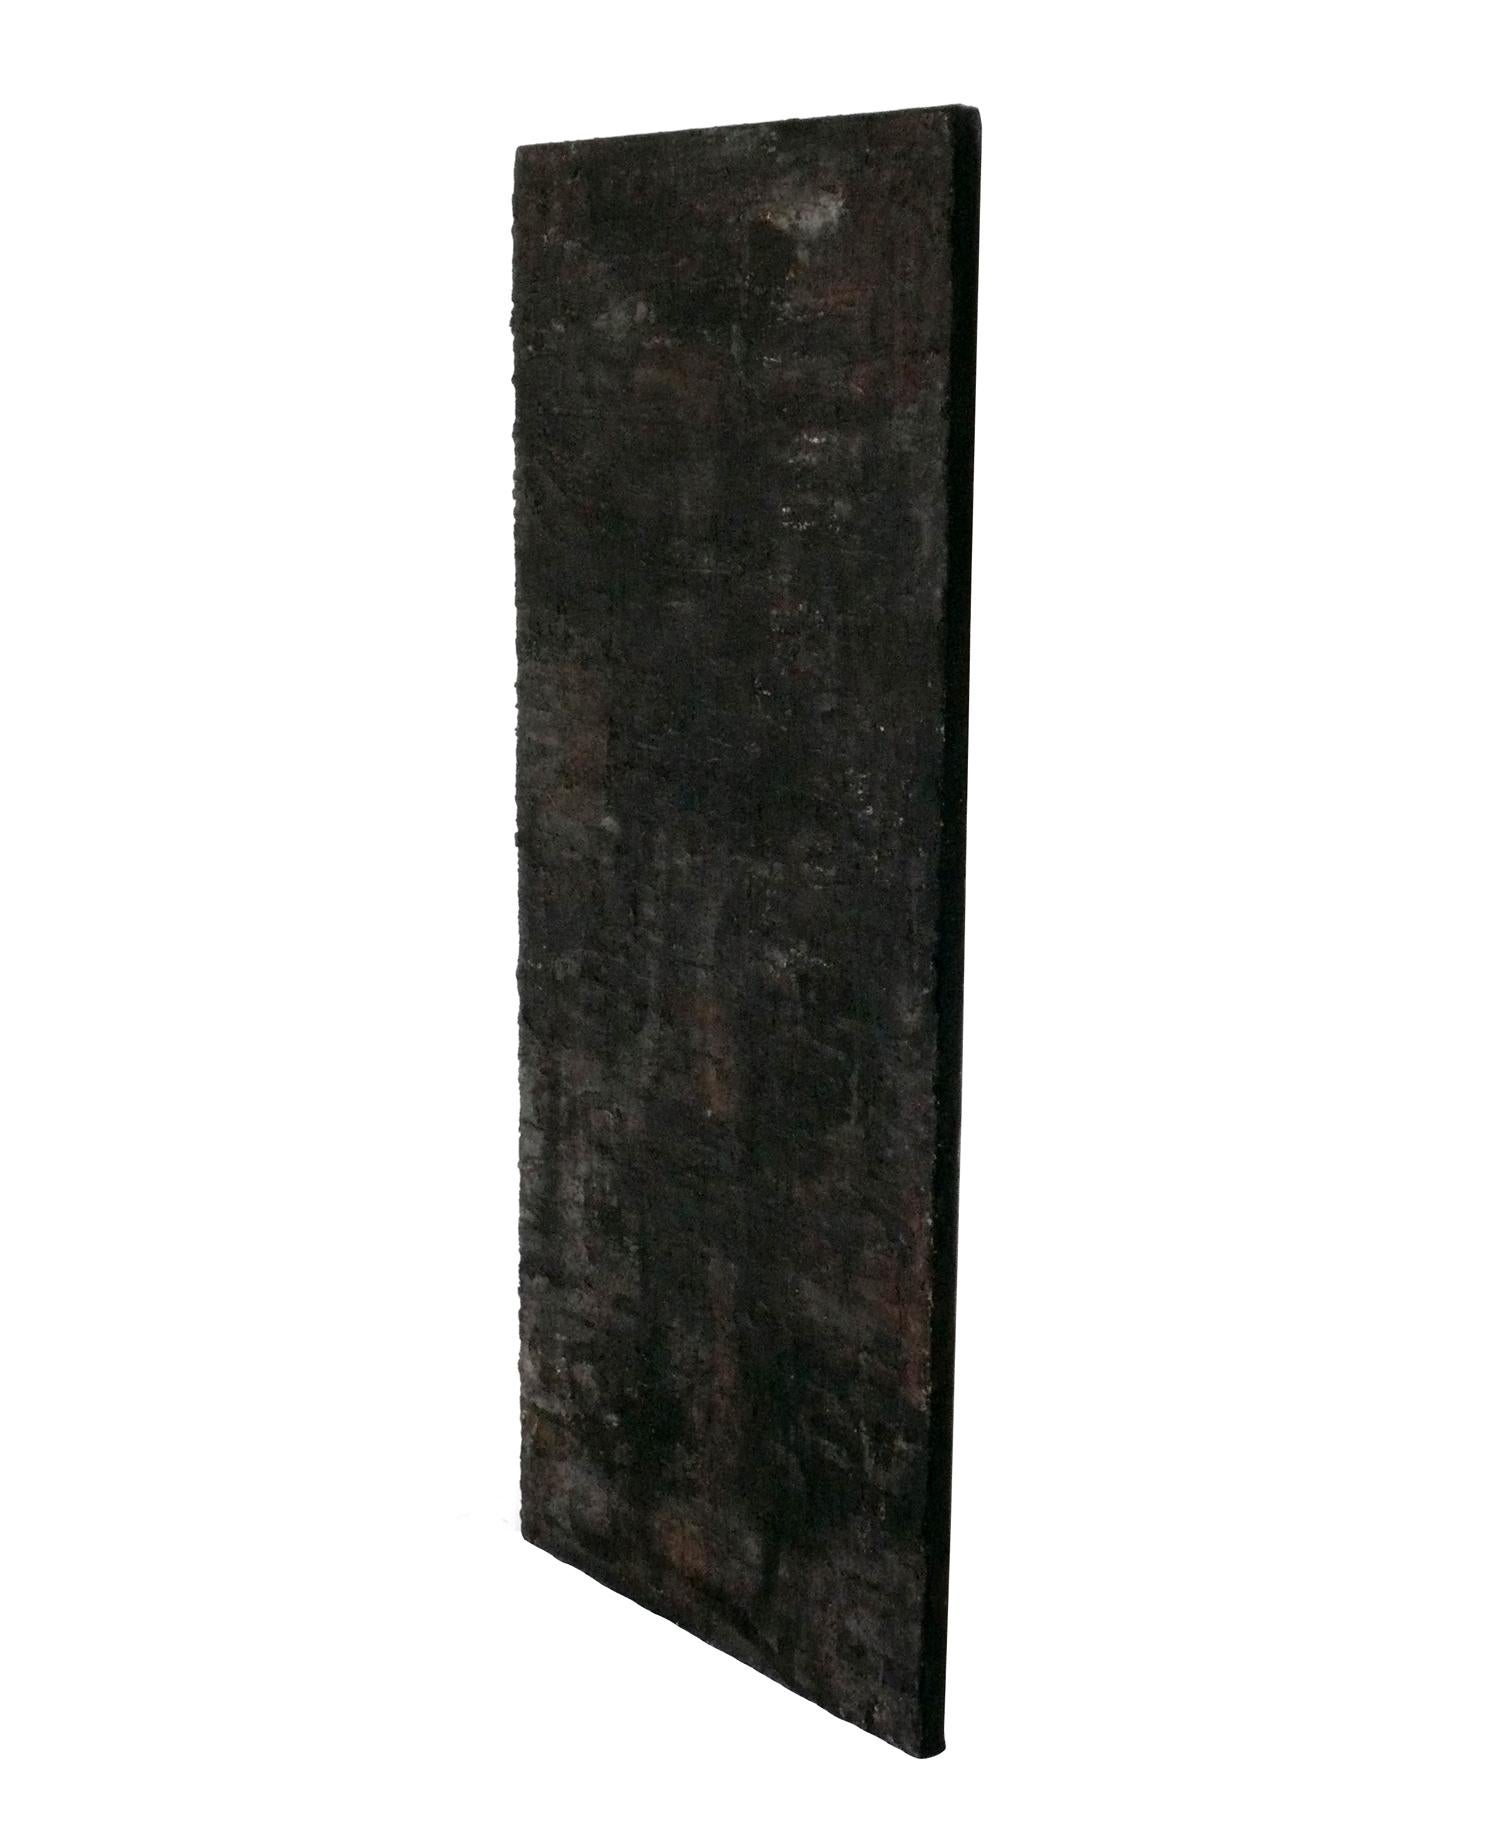 All Black Abstract Textural Painting, American, circa 1960s. Wonderful textural surface throughout. It appears to be all black, but under close inspection, you can see numerous other colors were used to create it. It can be hung vertically or